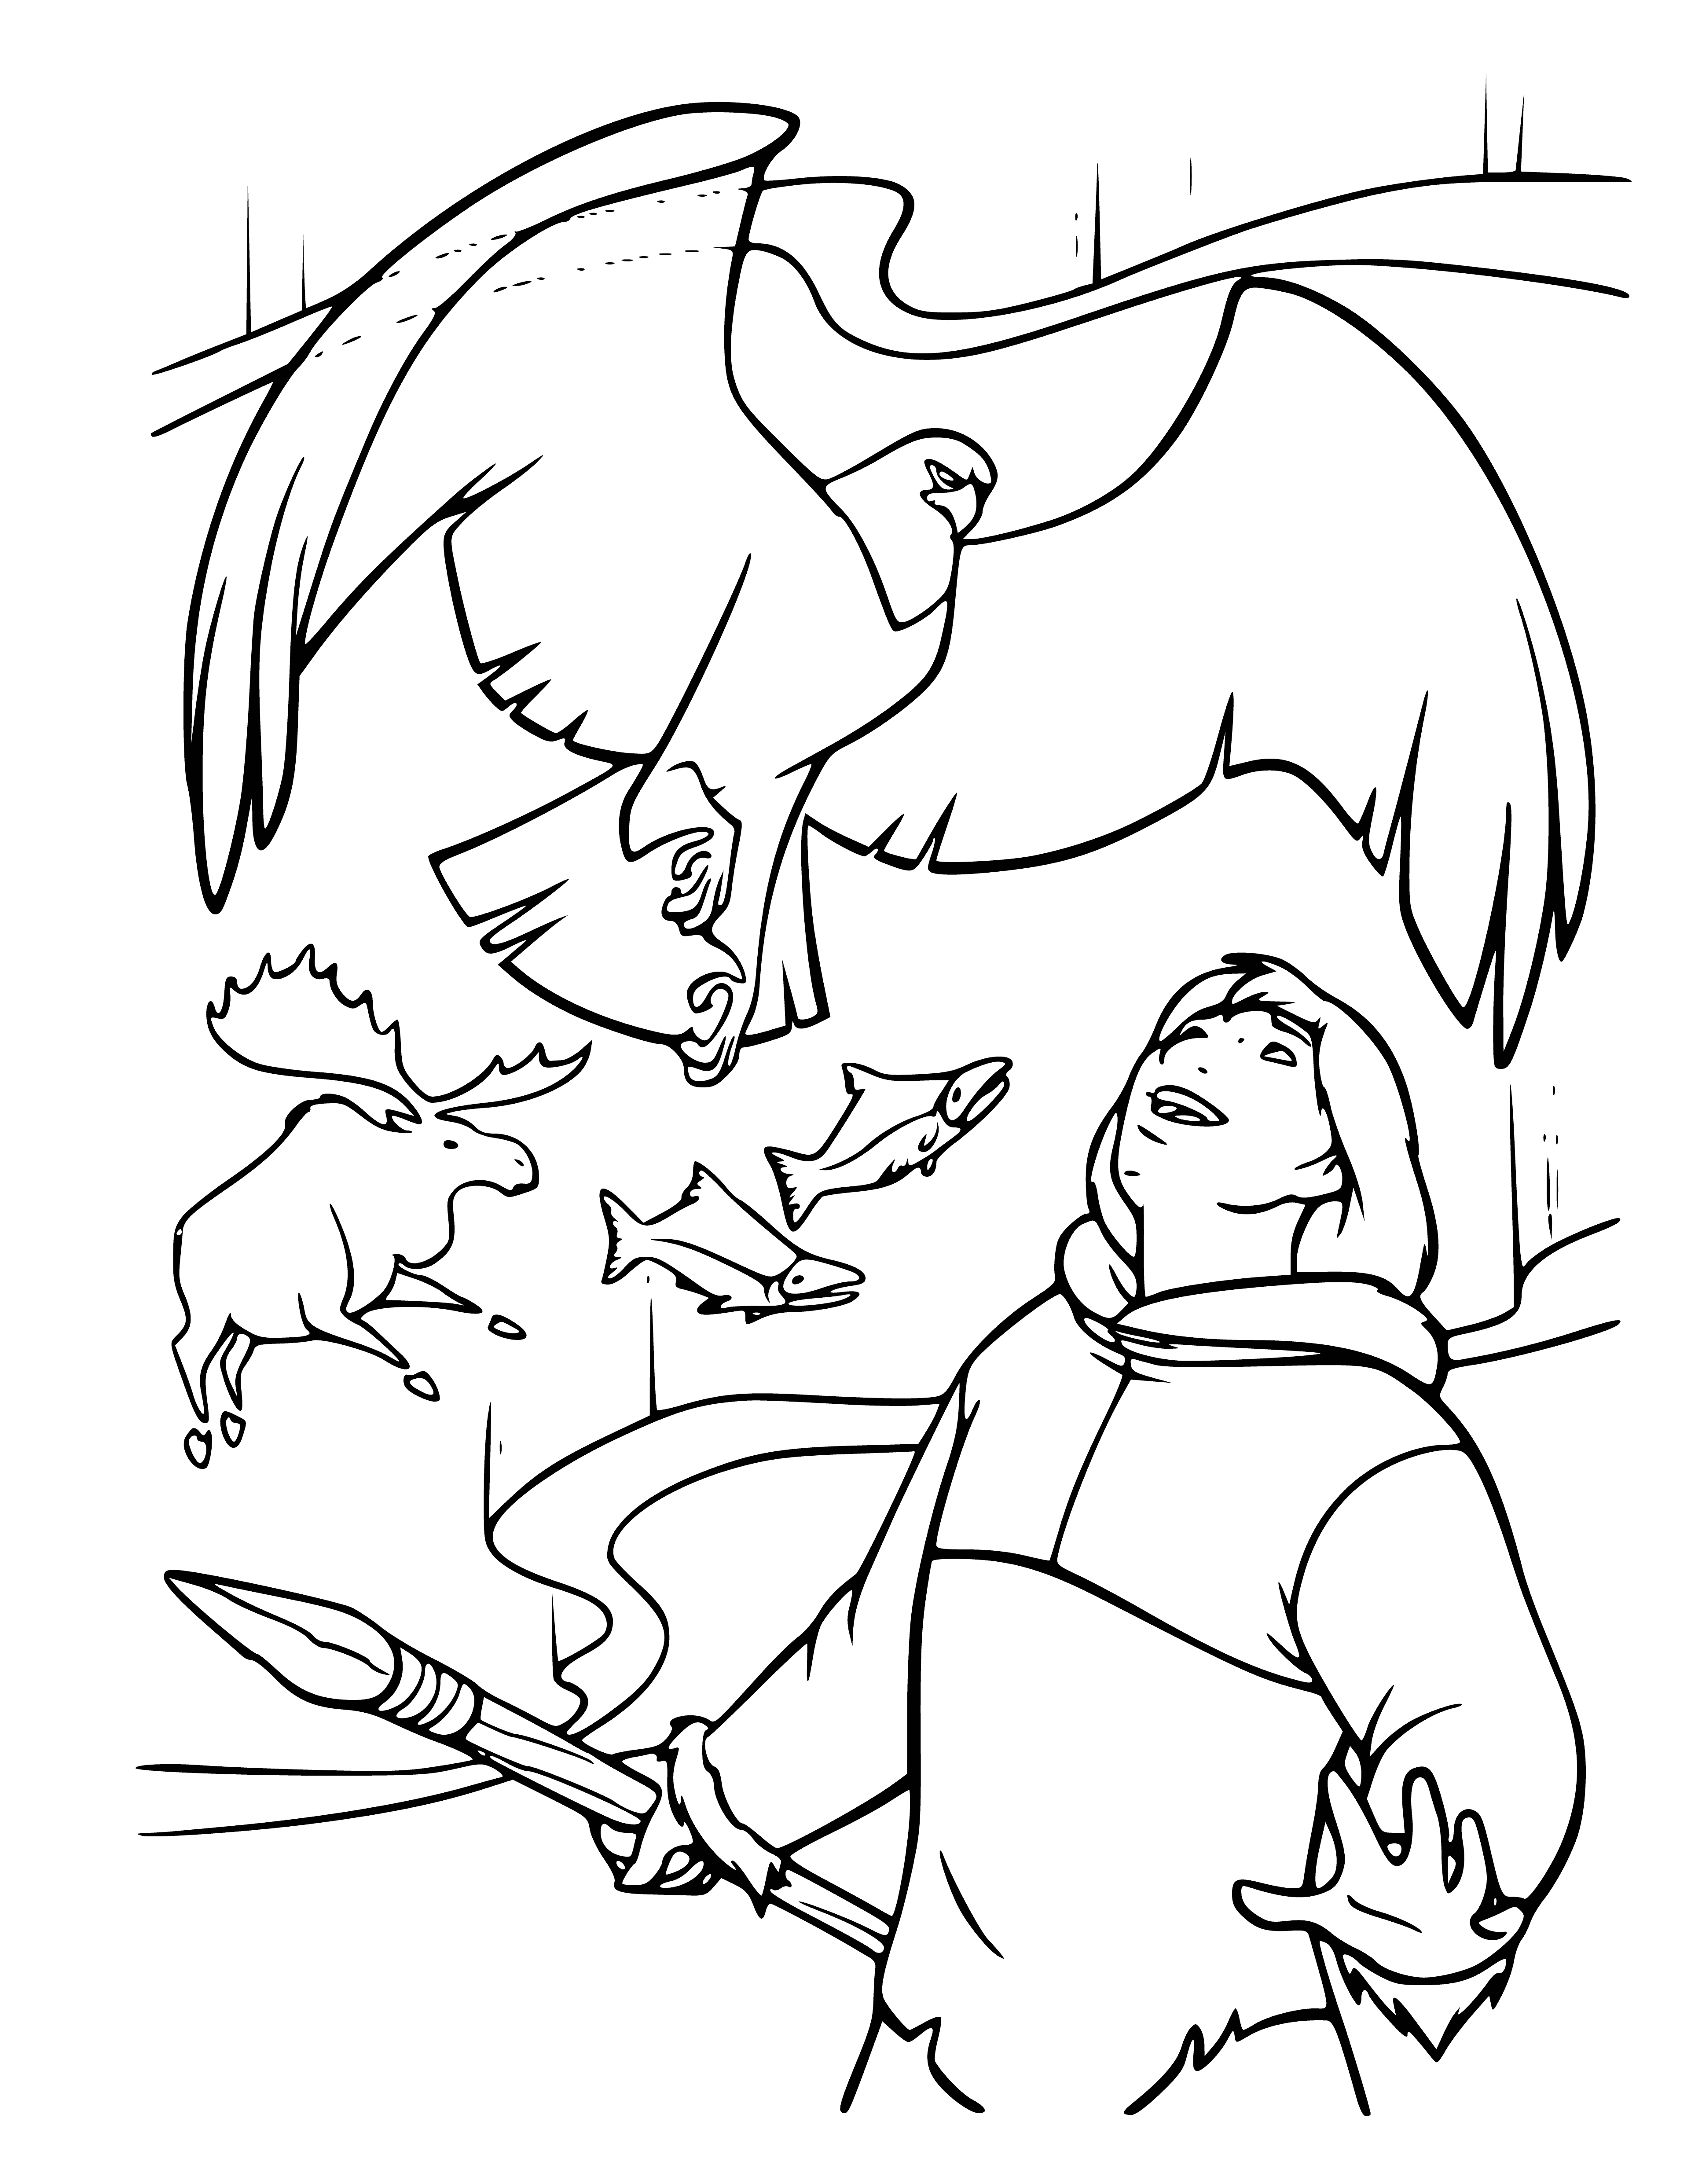 coloring page: Large orange bear stands on cliff, holding drum. Red scarf & 2 birds on back. Blue sky with white clouds above.